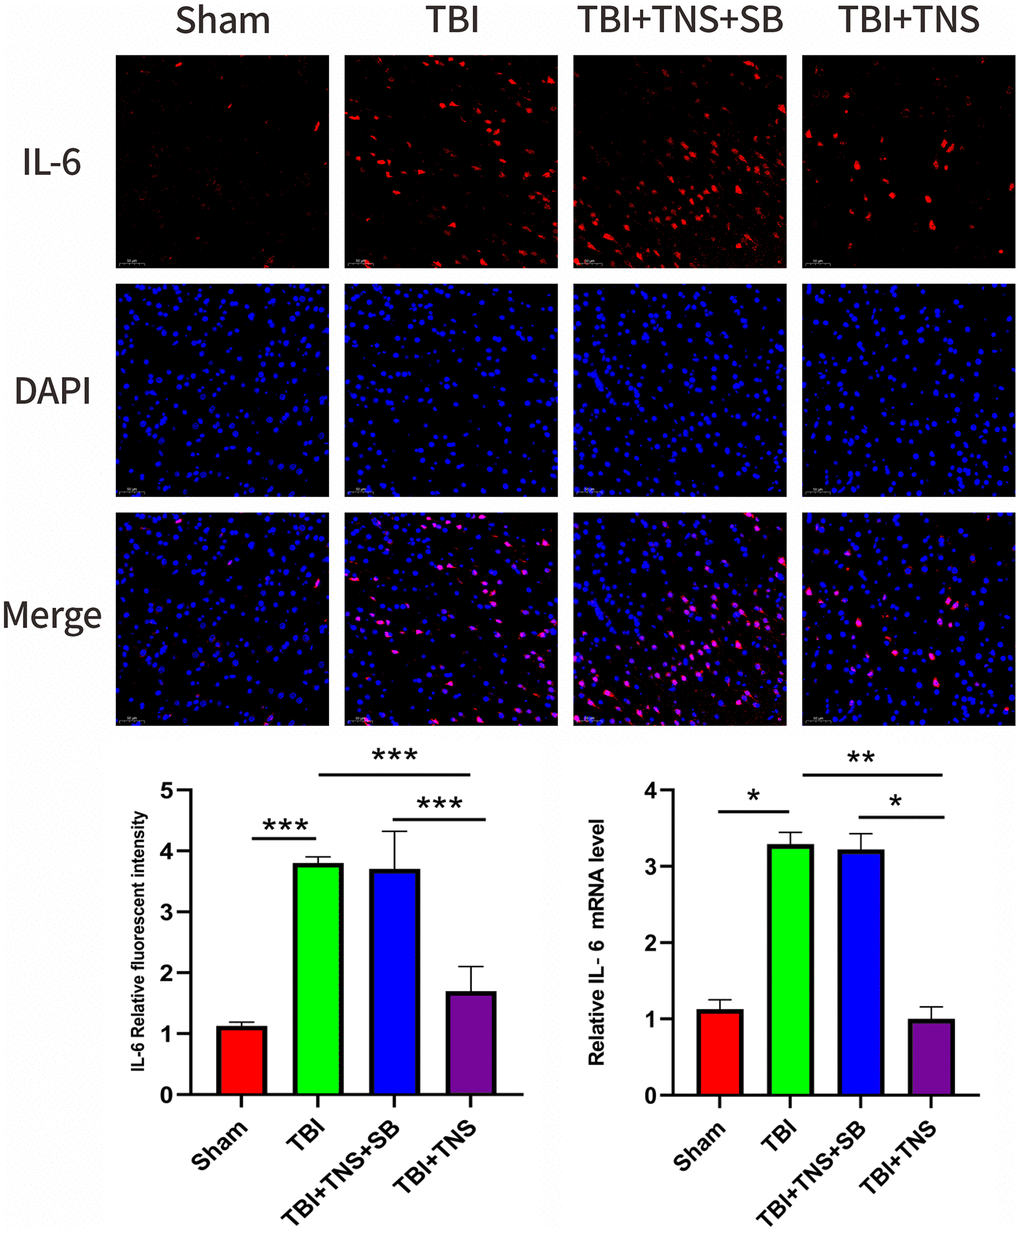 Trigeminal nerve electrical stimulation (TNS) decreases interleukin (IL)-6 levels after traumatic brain injury (TBI) via orexin-A (OX-A)/orexin receptor 1 (OX1R). Representative immunofluorescence staining and relative mRNA levels of interleukin IL-6. Results are expressed as mean ± standard deviation (SD; *P **P ***P 